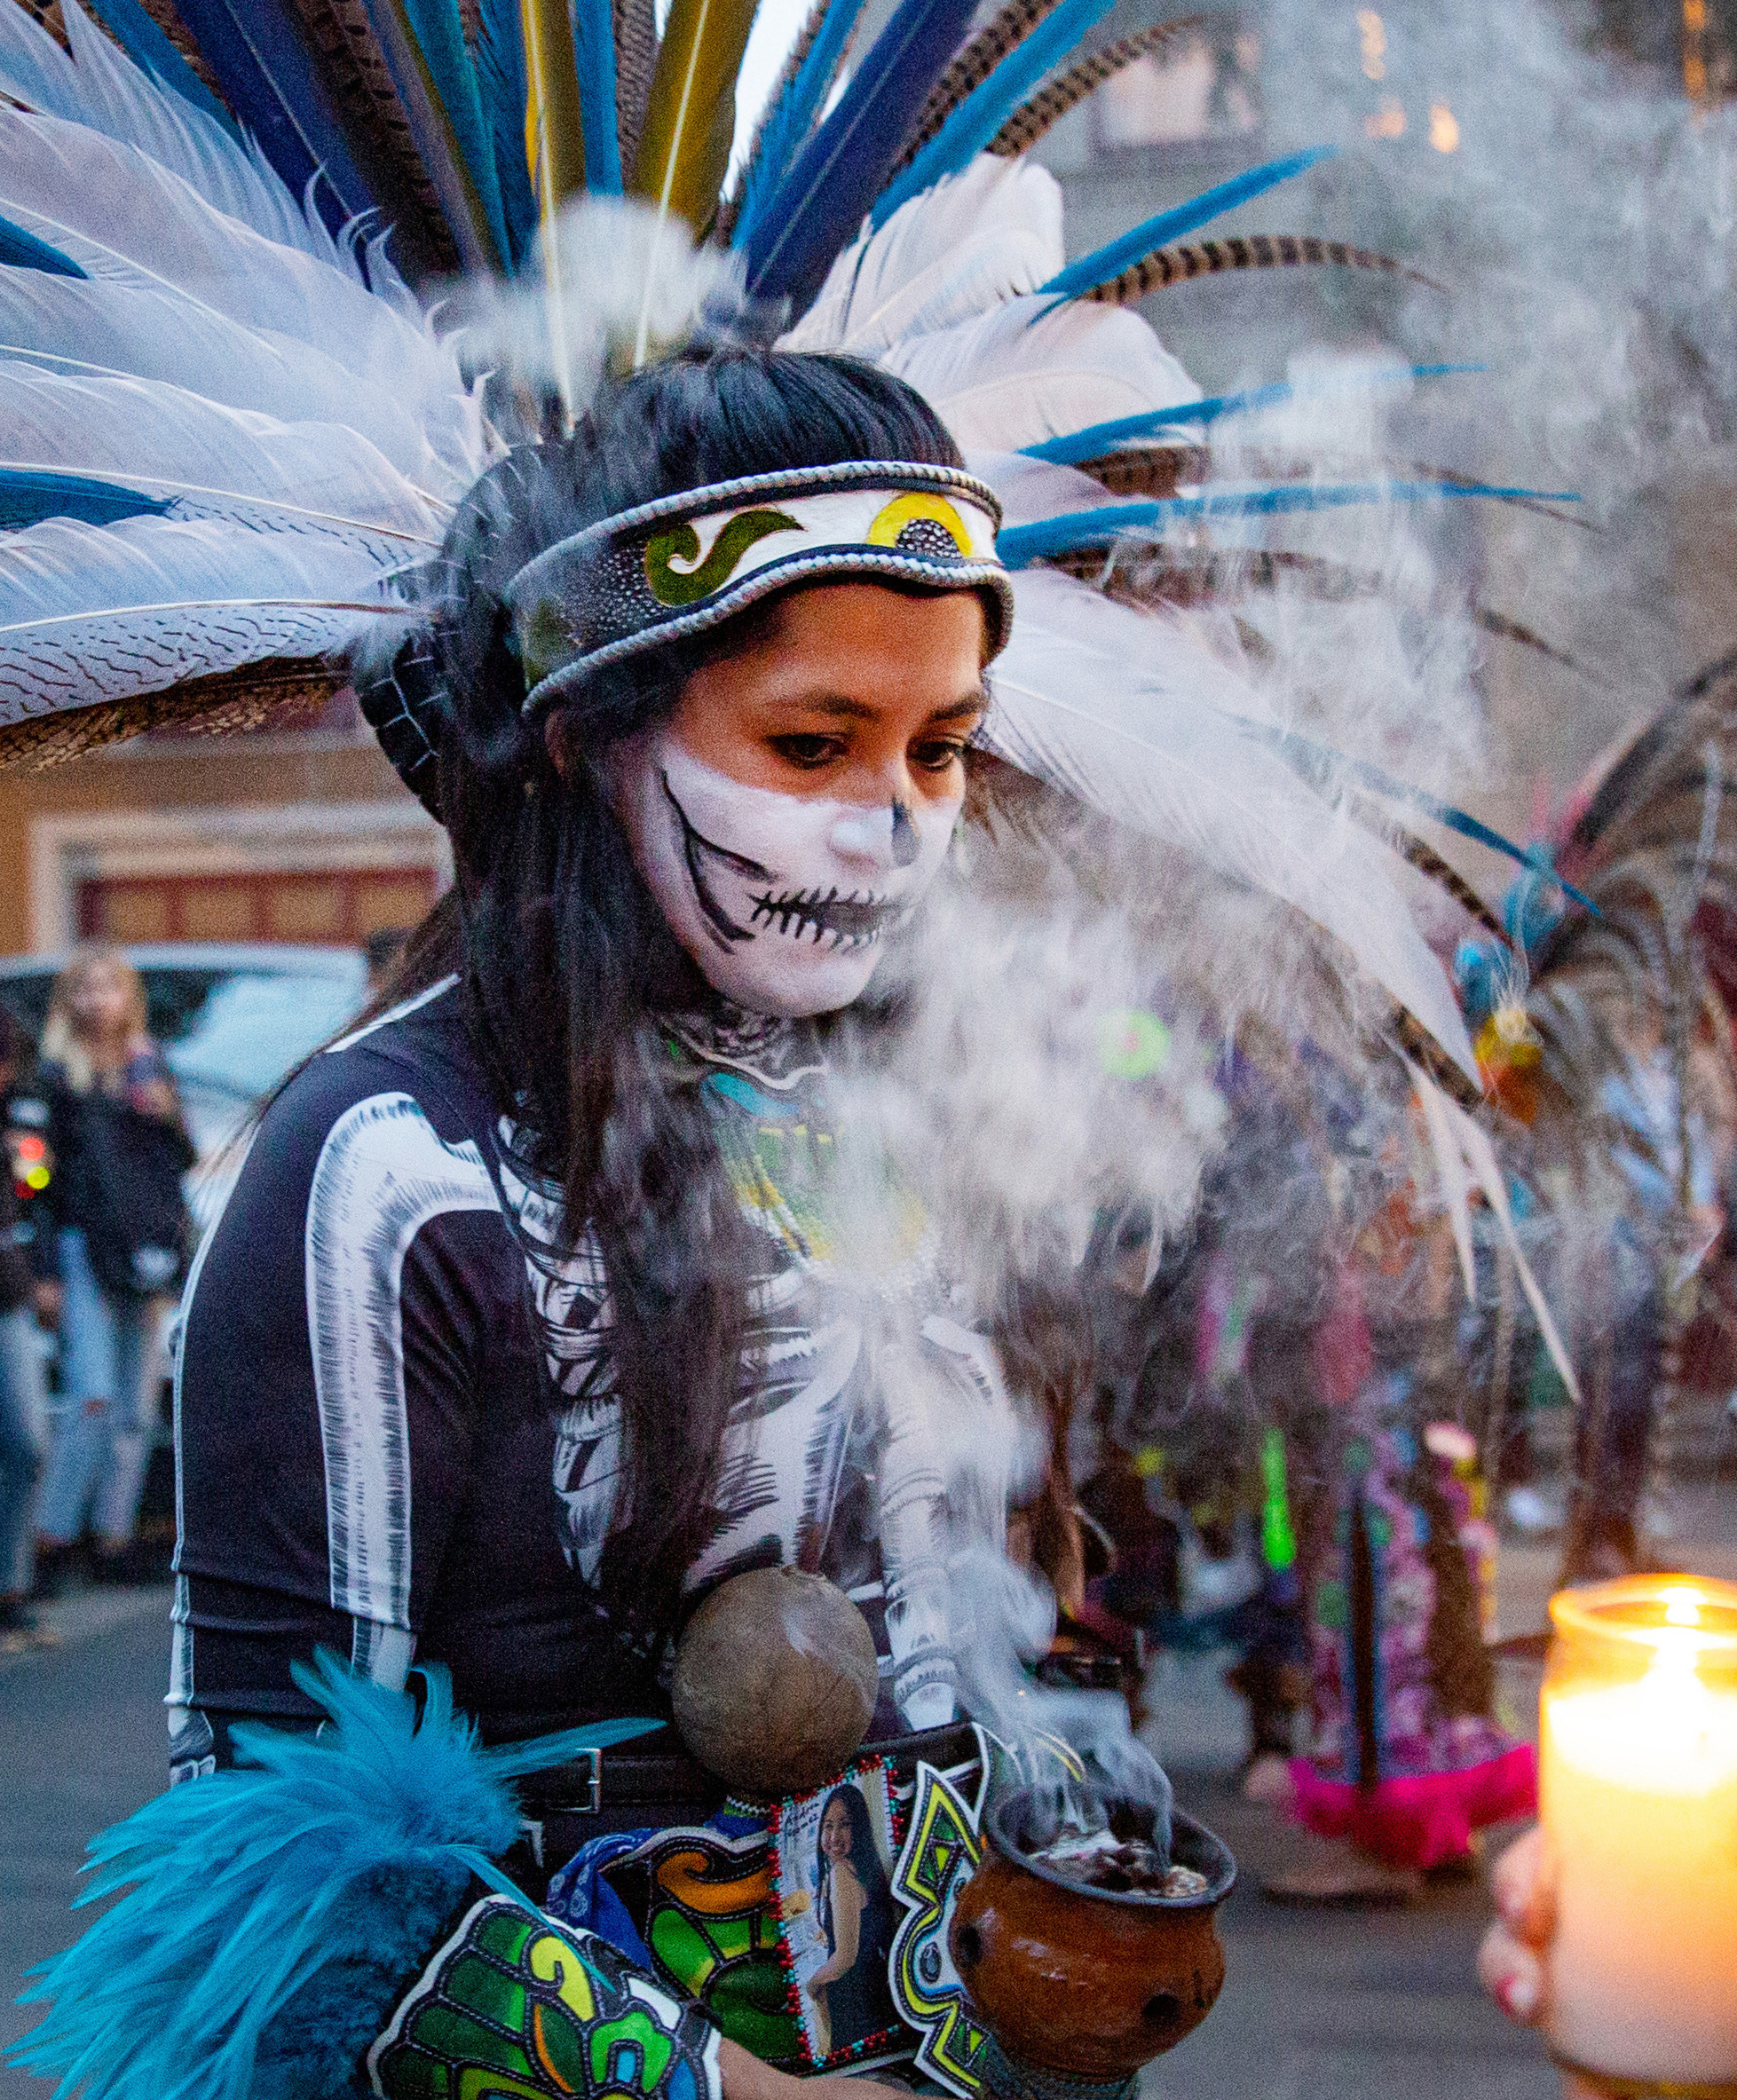 A person dressed in a feather headdress and costume burns incense during an outdoor event